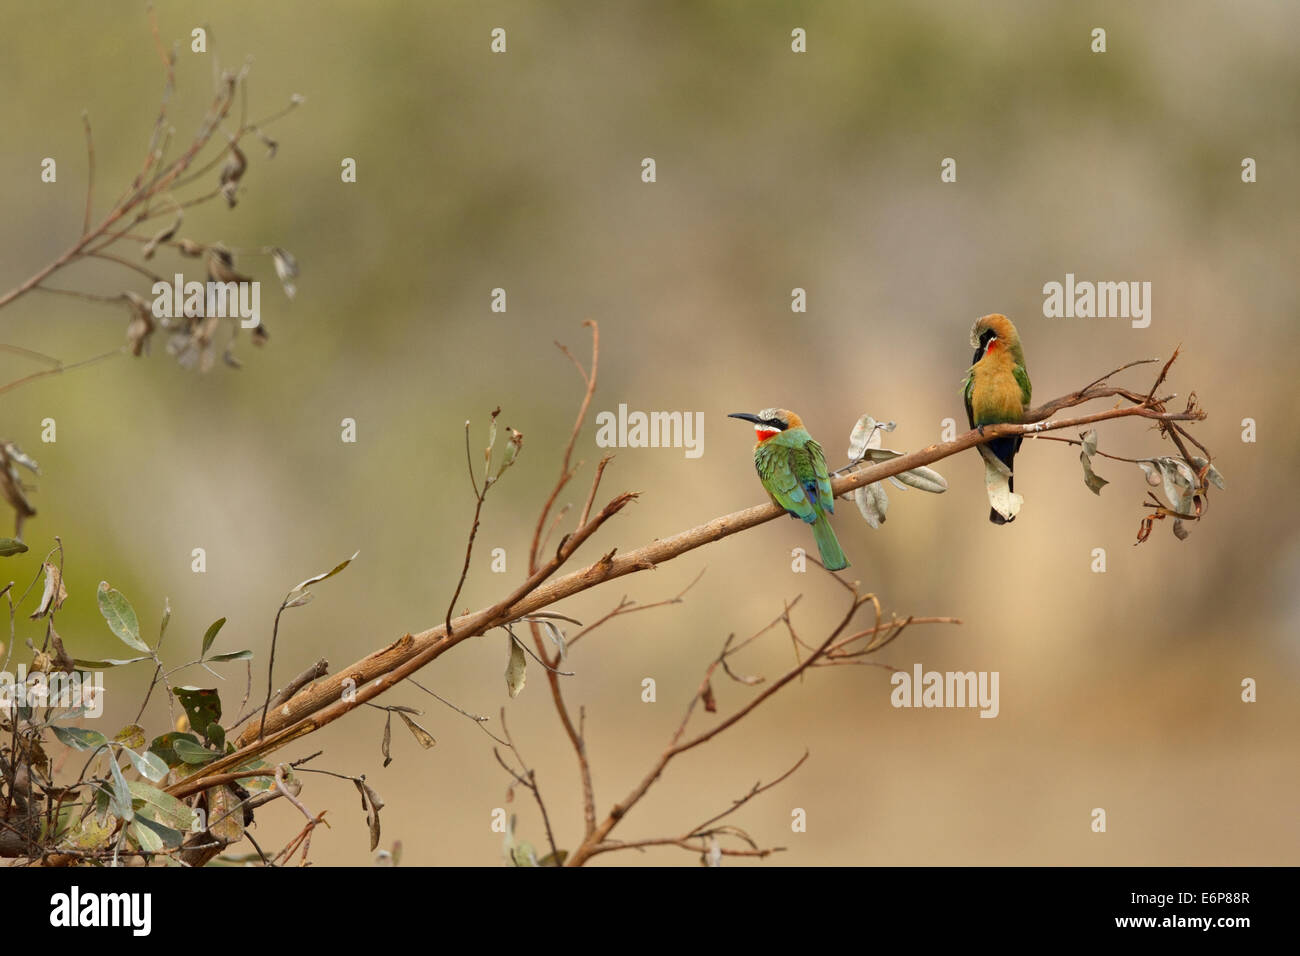 Two White-fronted Bee-eater (Merops bullockoides) perched on a twig, Stock Photo